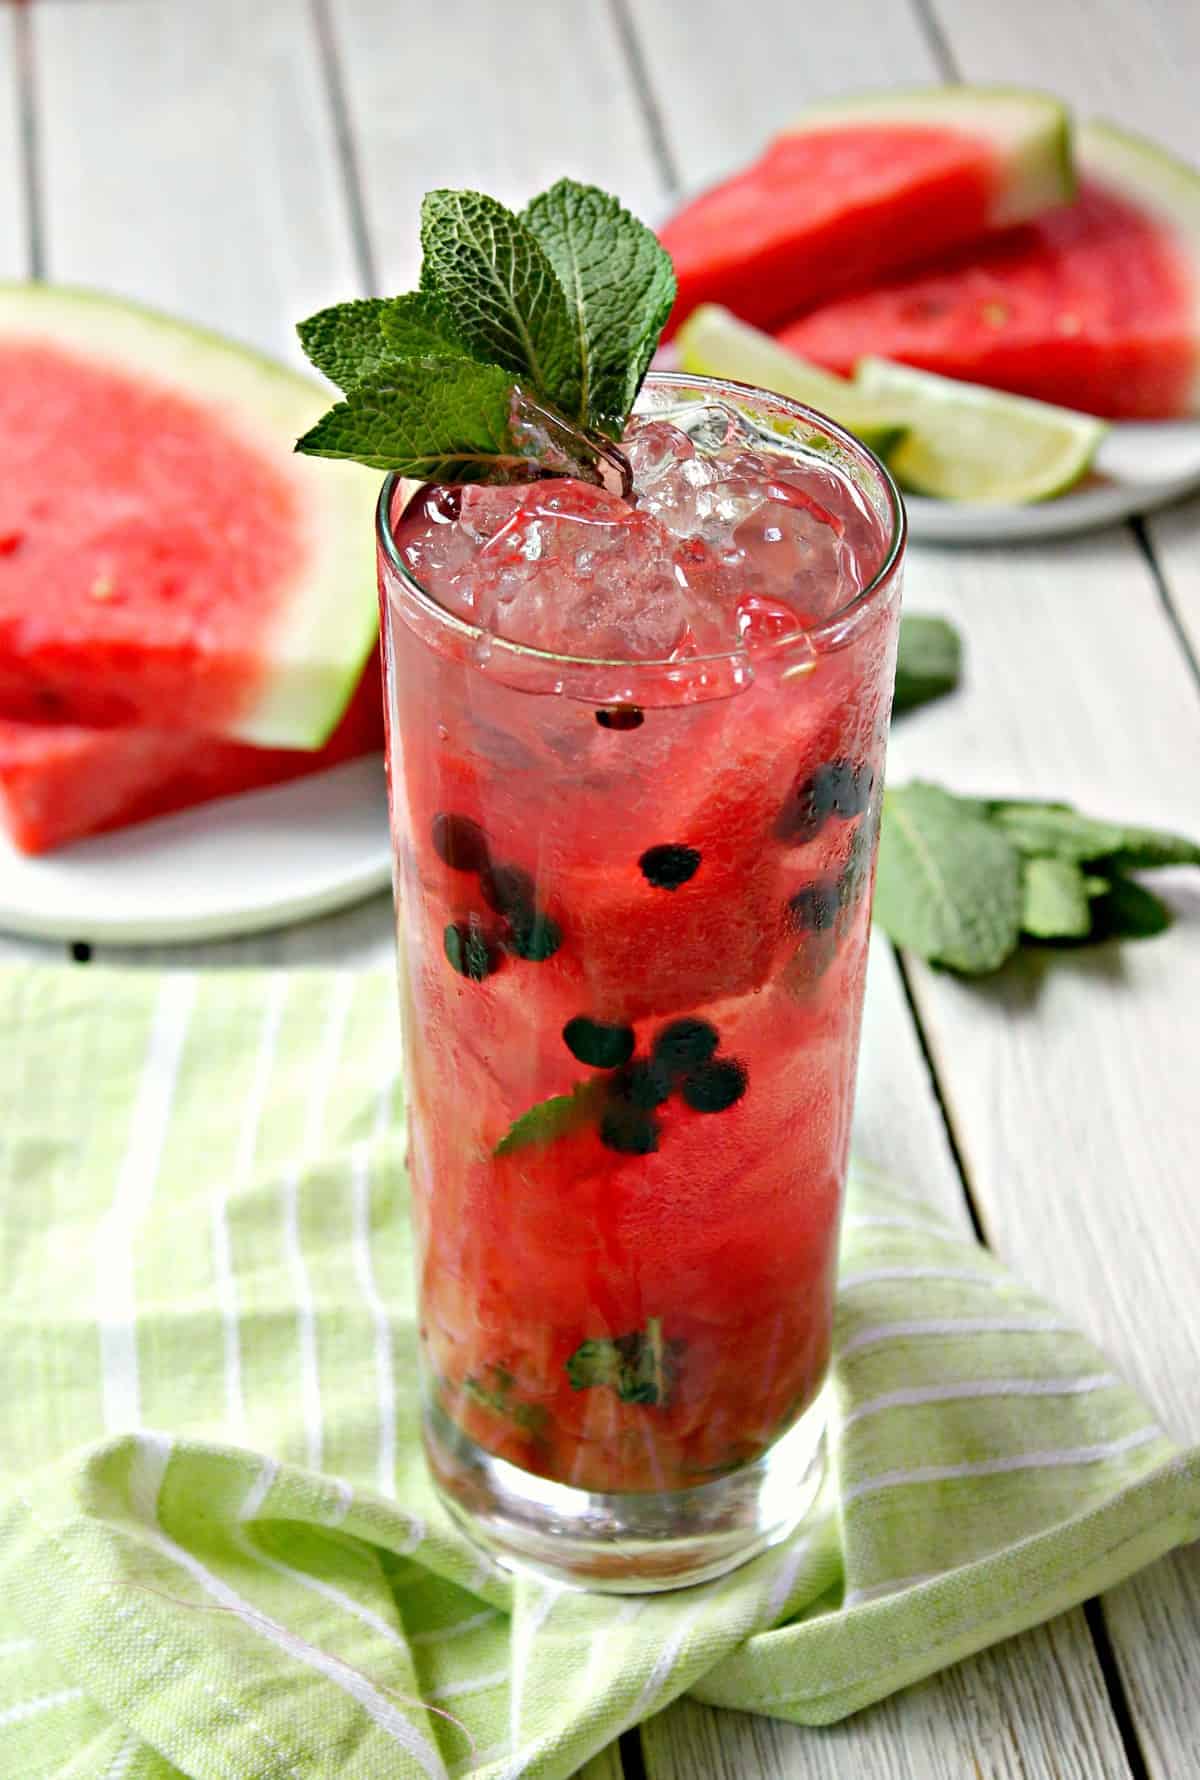 Watermelon Mojitos! If summer had an official drink, this would be it: Sweet watermelon muddled with fresh mint leaves, lime juice and rum! It's the perfect cocktail for poolside gatherings or summer parties -- make a couple for an at-home "happy hour" or mix up a pitcher for a crowd!